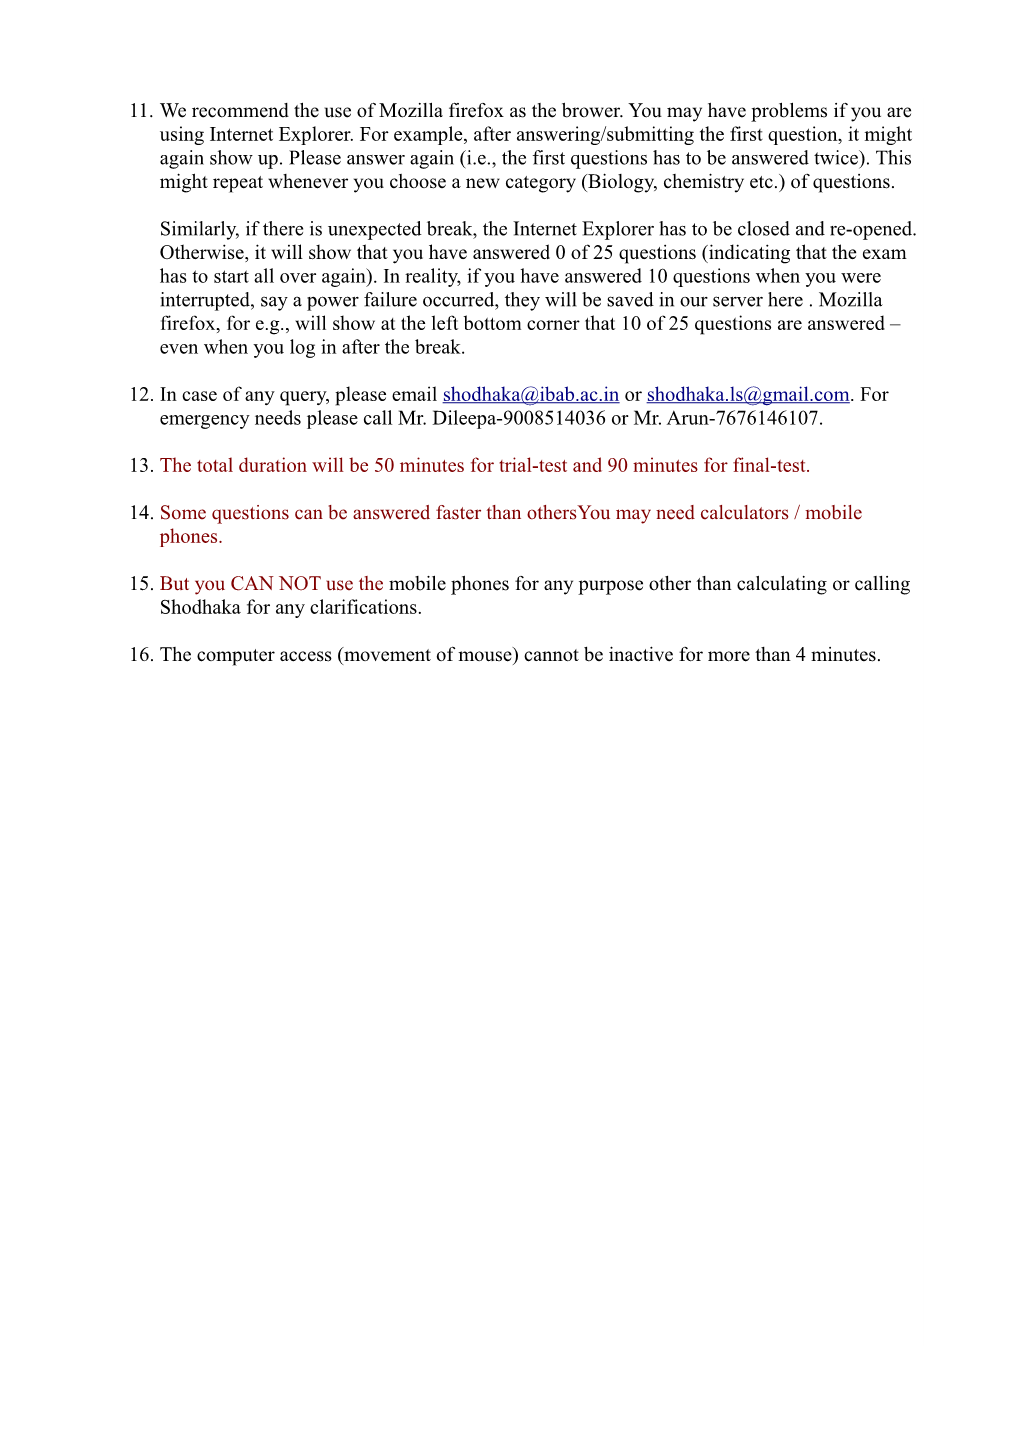 Instructions for the Final Online Test Being Conducted